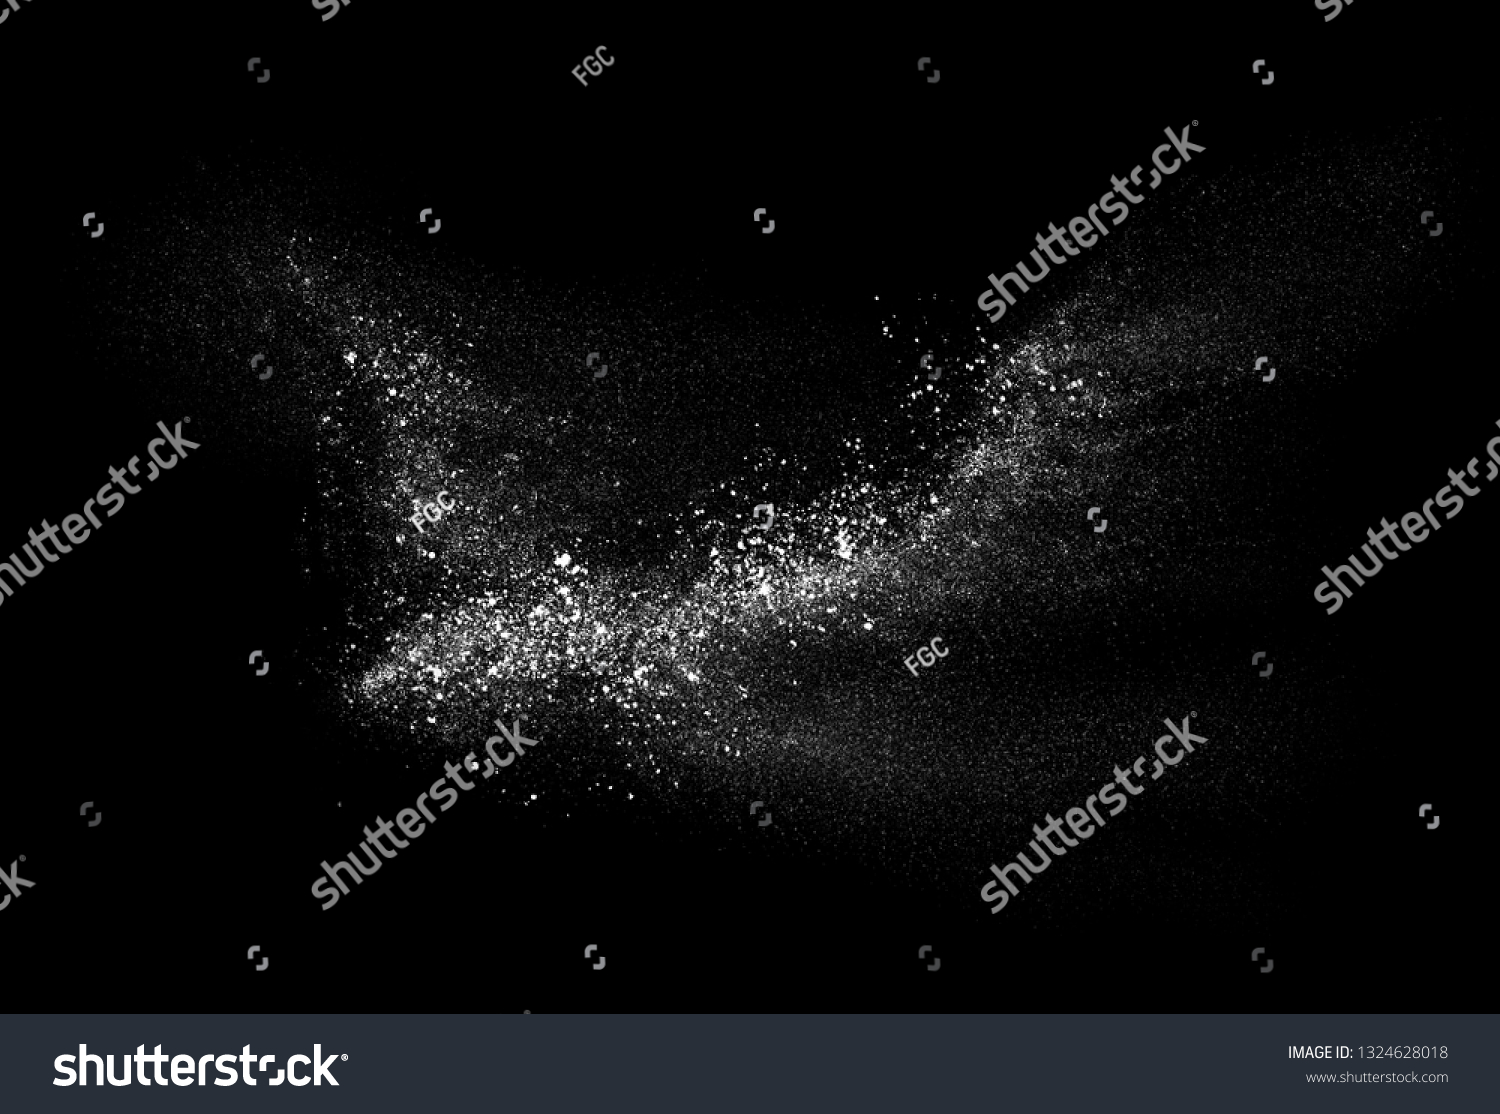 Freeze motion of white powder exploding, isolated on black background. Abstract design of white dust cloud. #1324628018